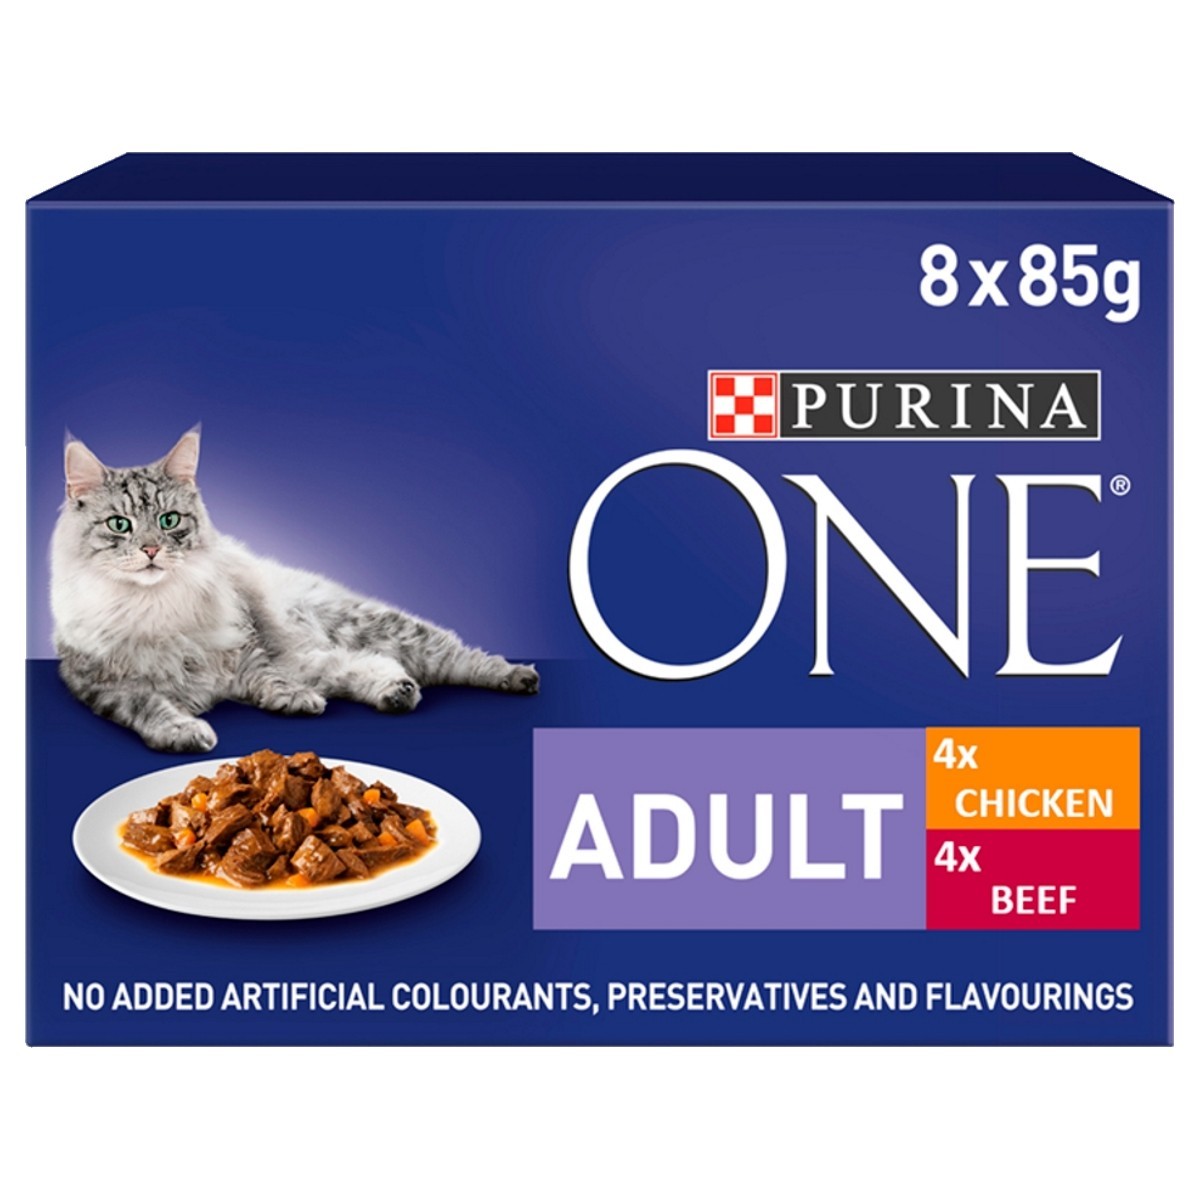 Purina ONE Pate Wet Cat Food, Natural Grain Free Beef, 3 oz Cans (24 Pack)  